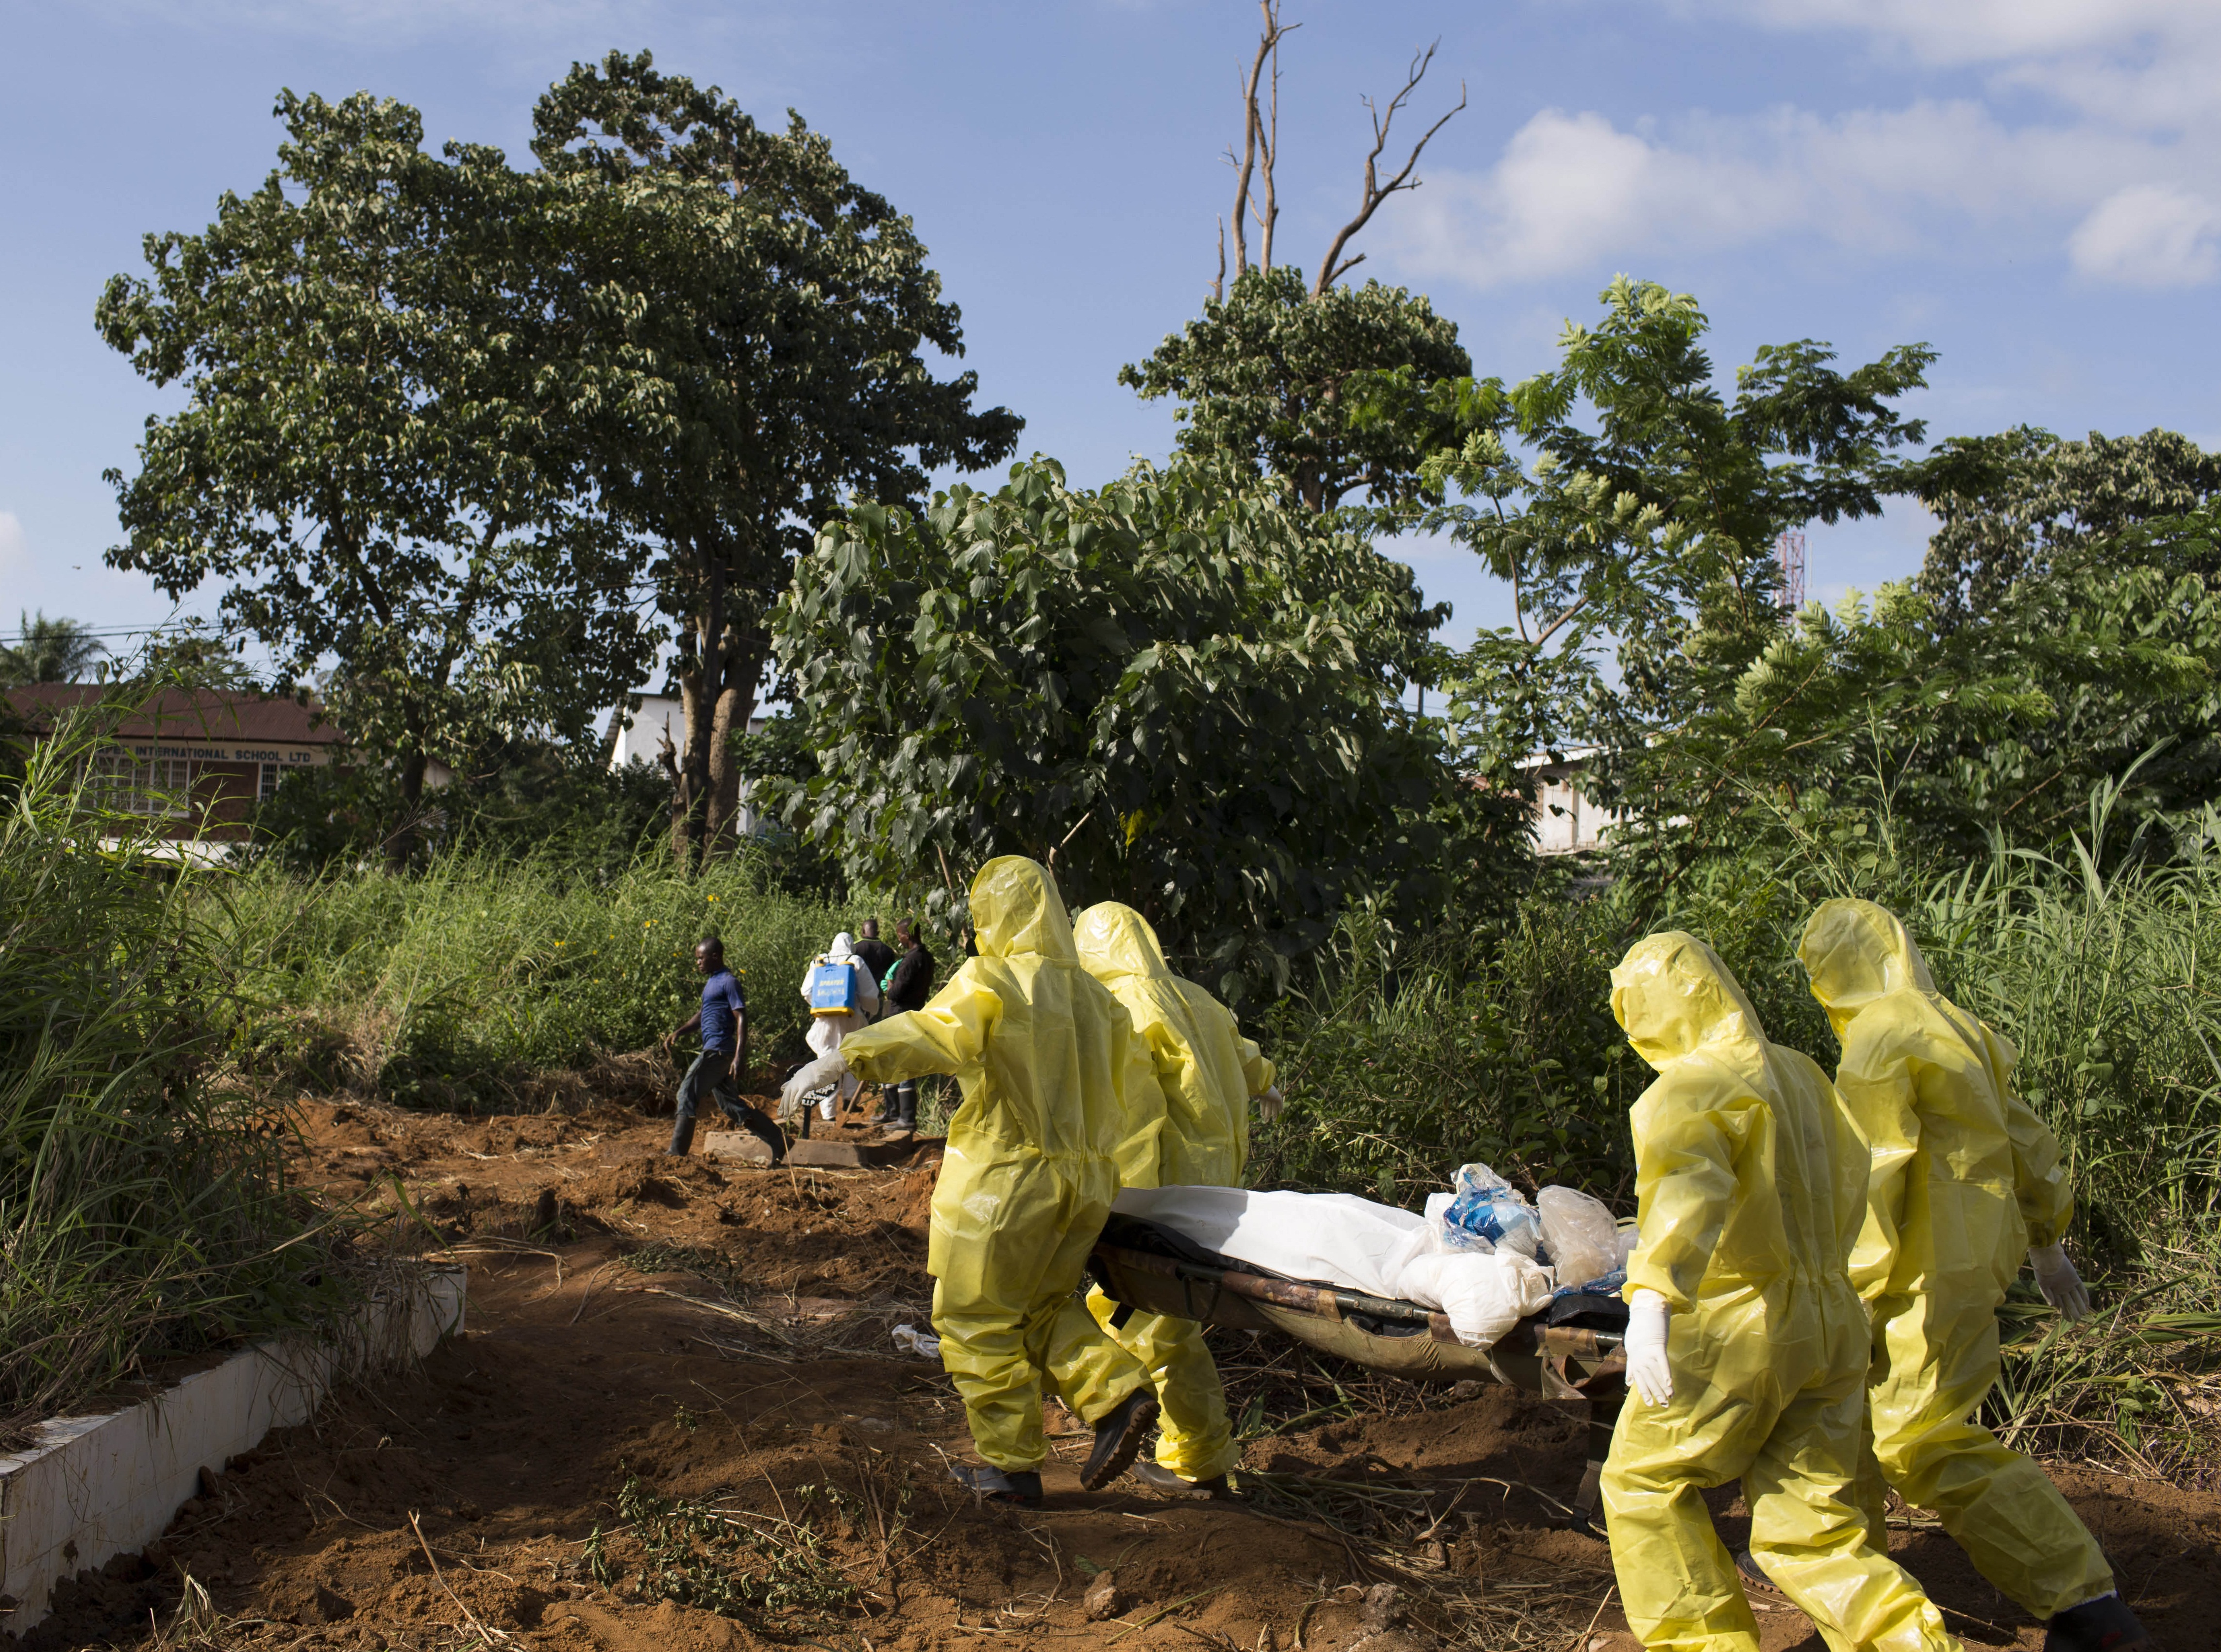 6 Ways The Feds Screwed Up The Ebola Response